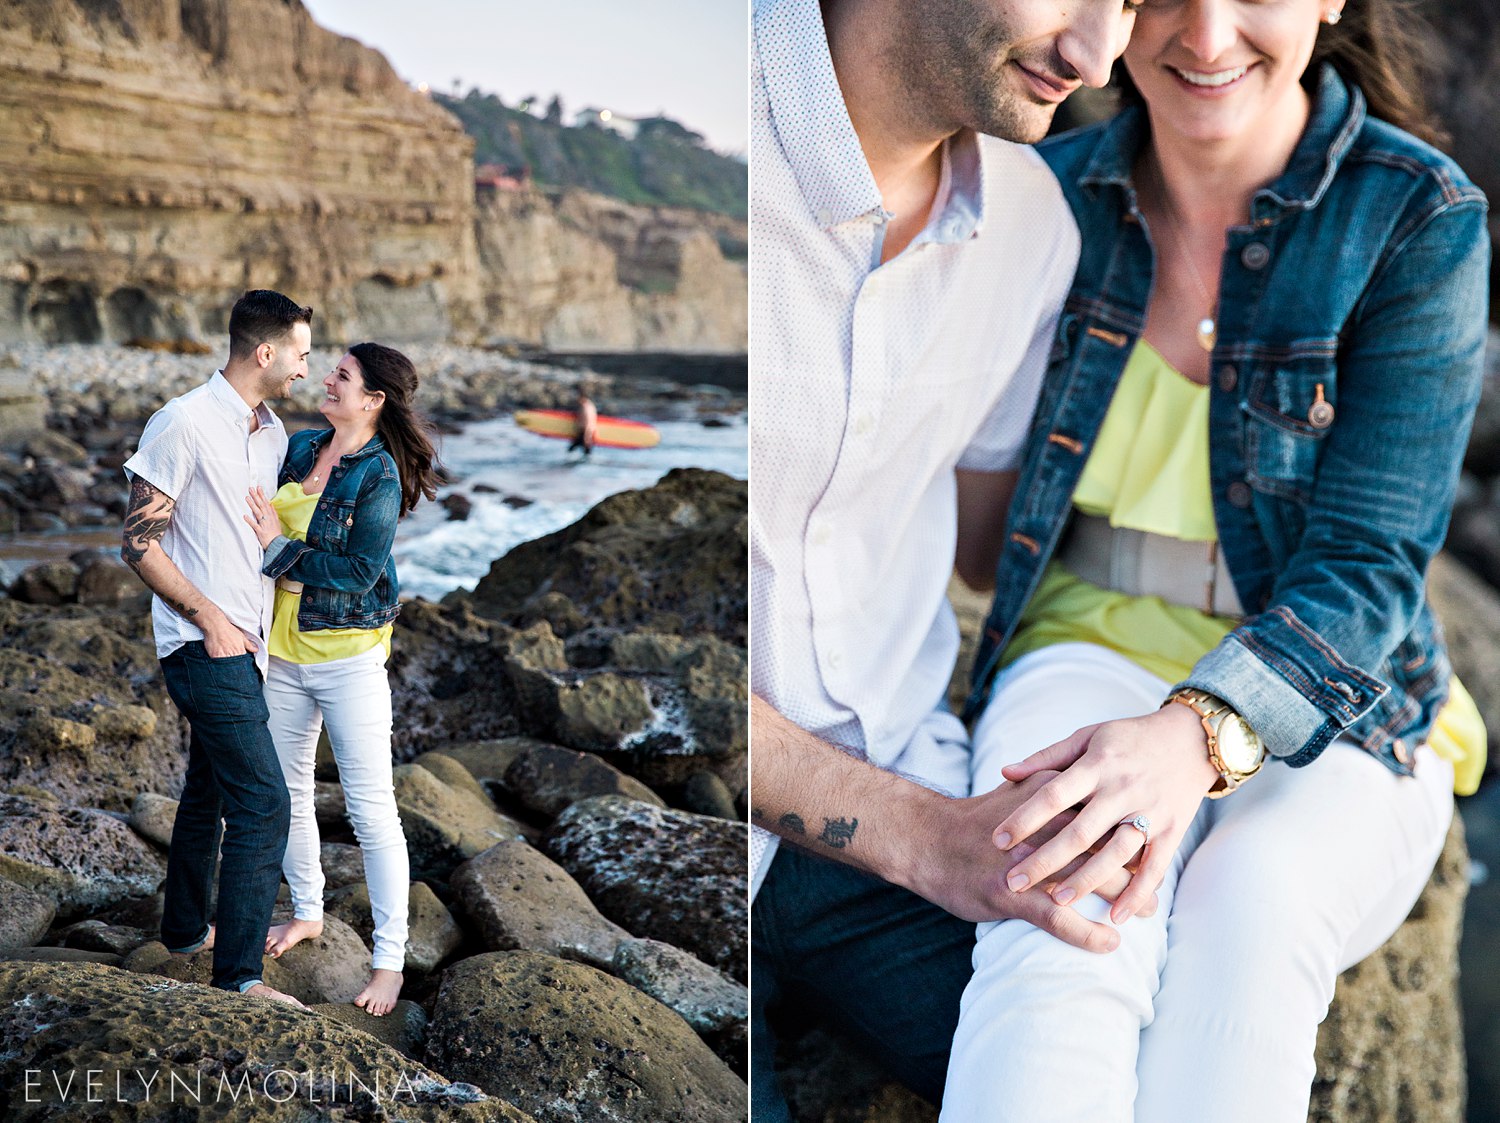 Sunset Cliffs Engagement Session - Carly and Alex - Evelyn Molina Photography_0031.jpg